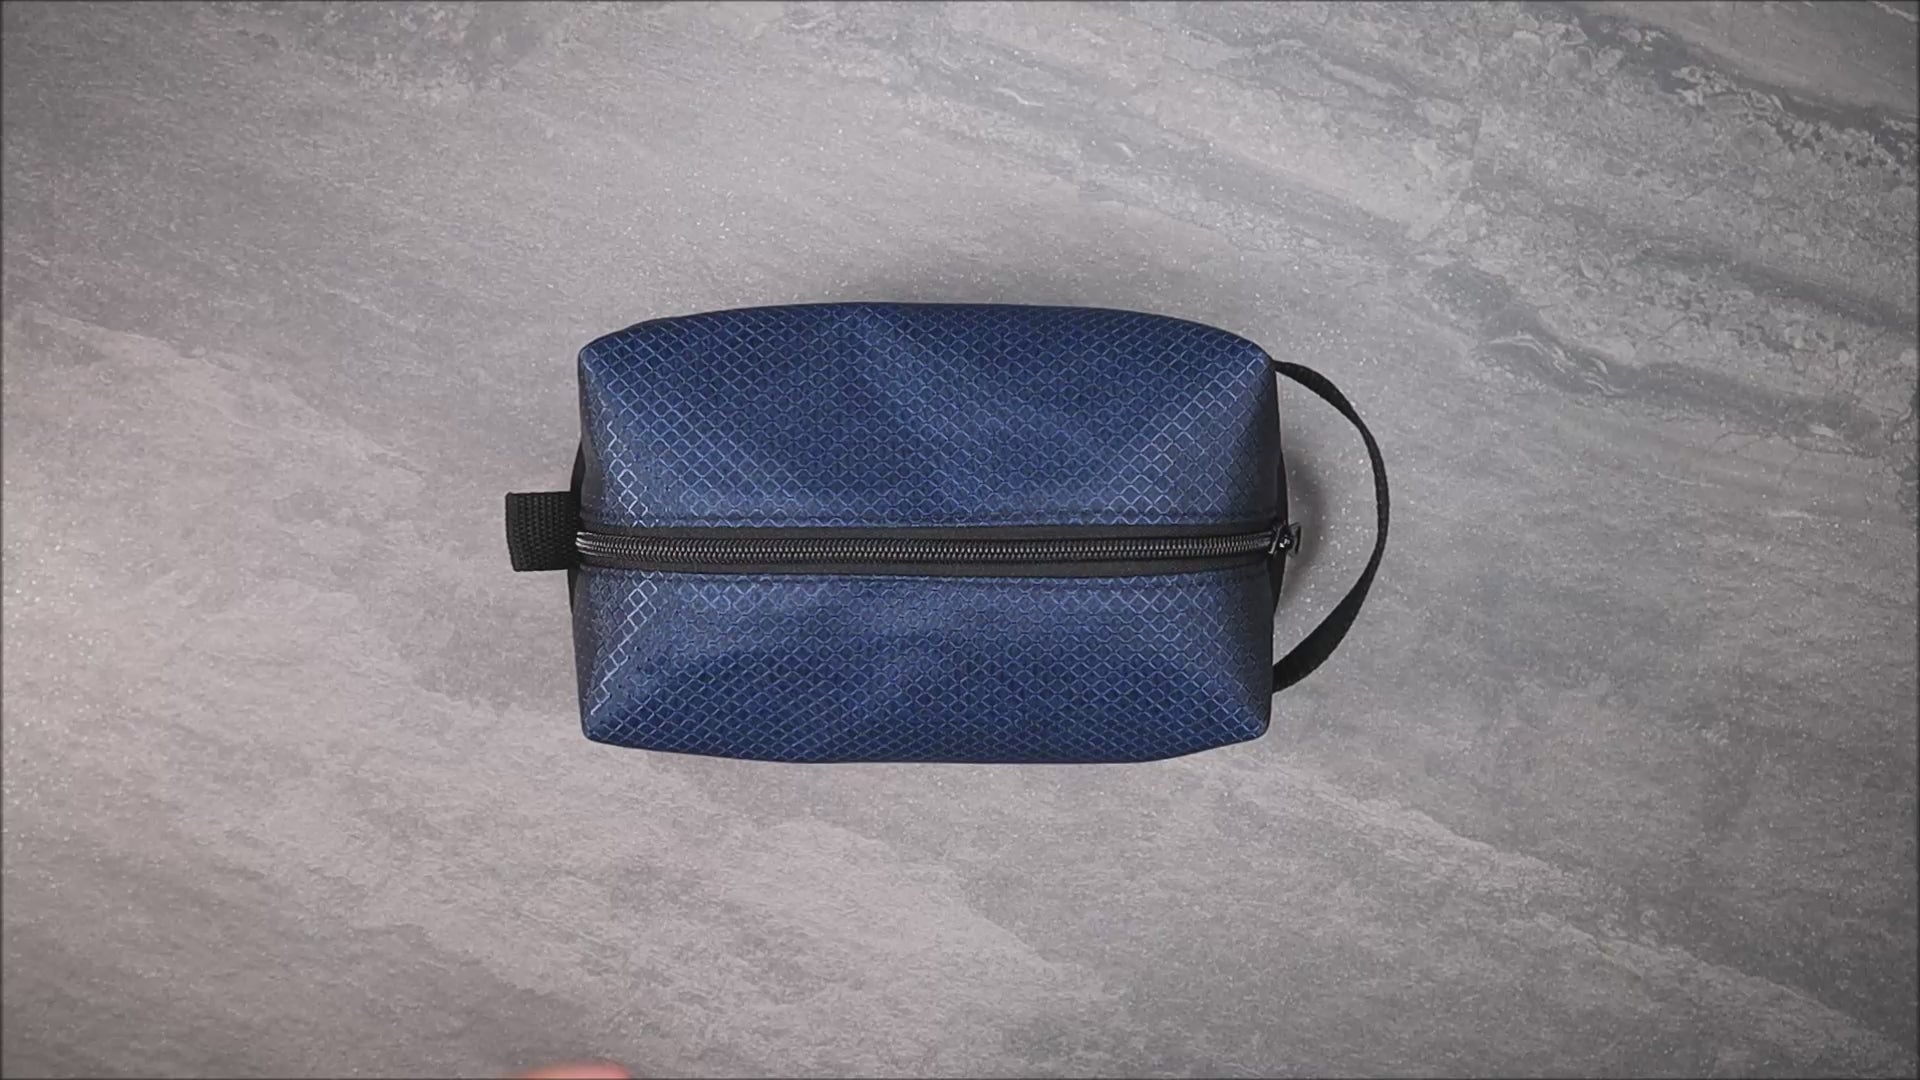 Navy Blue and Black Ripstop and Canvas Toiletry Bag